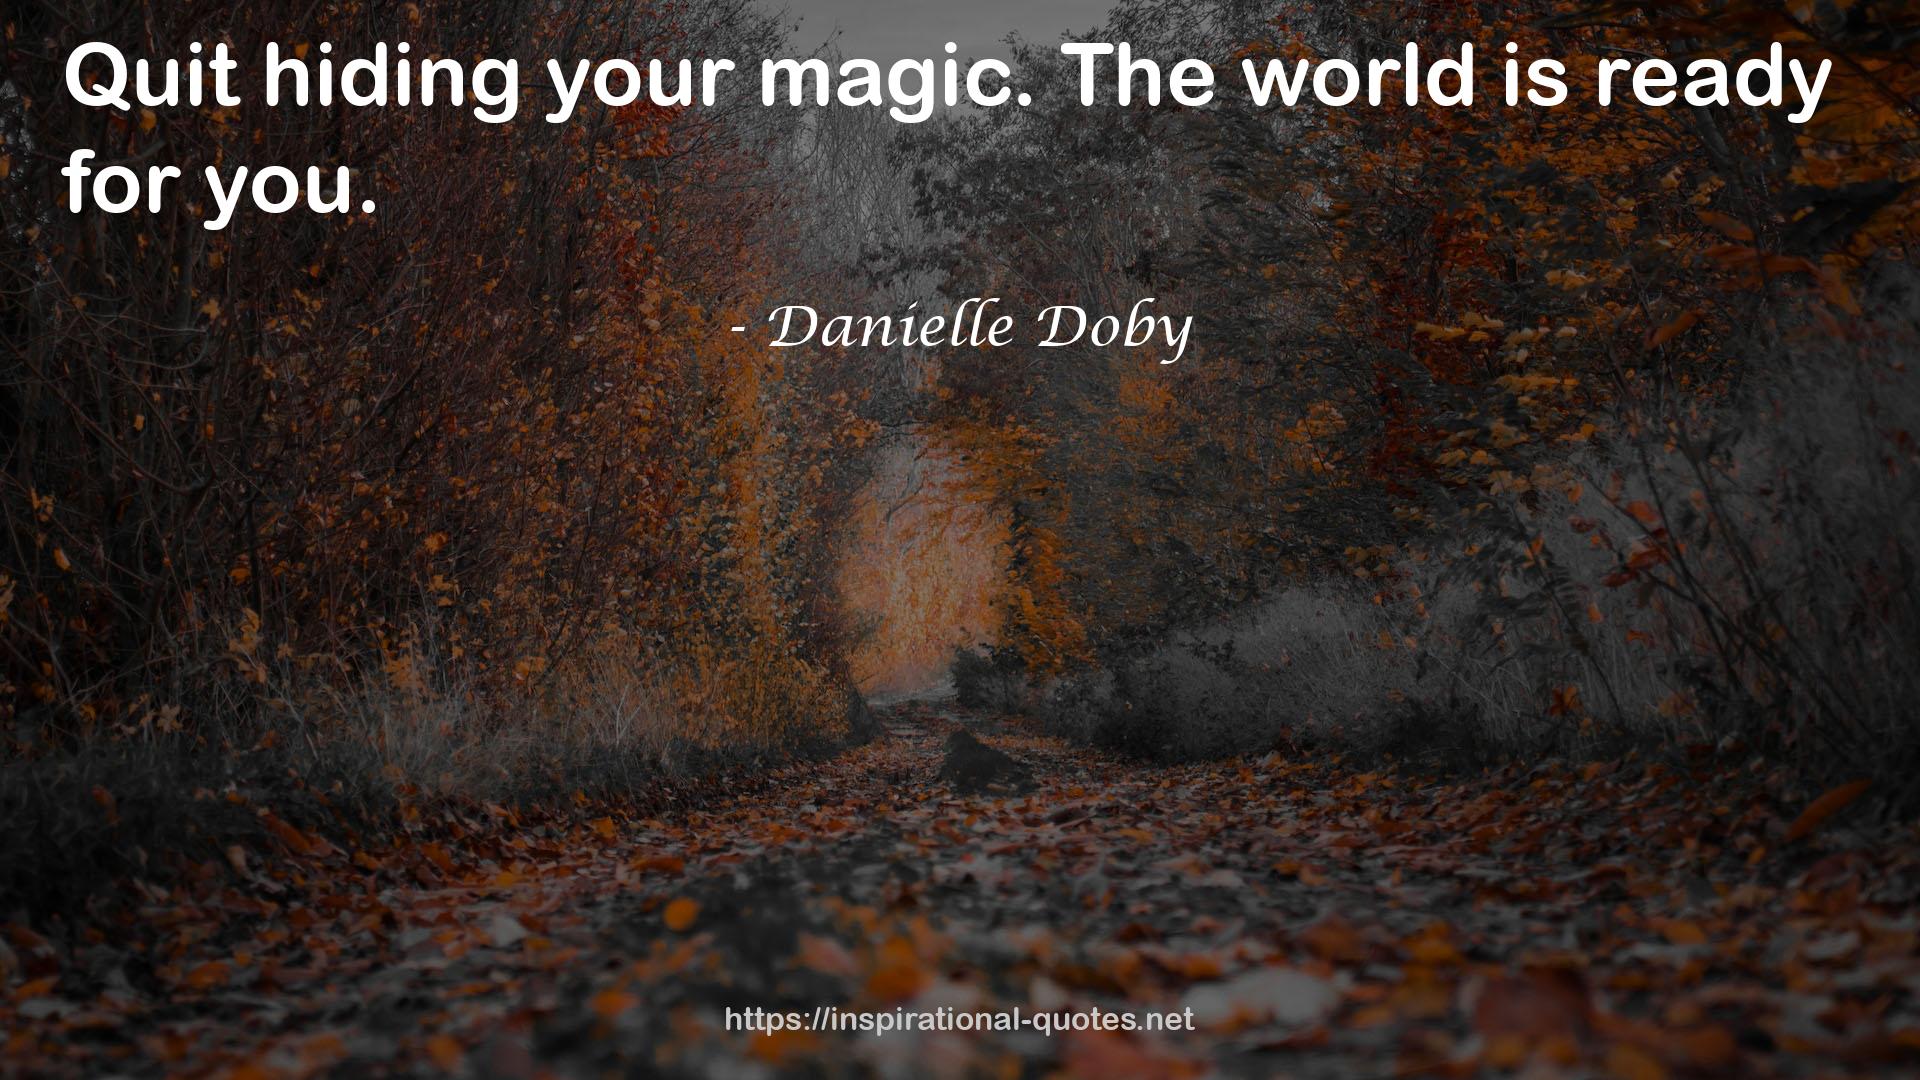 Danielle Doby QUOTES